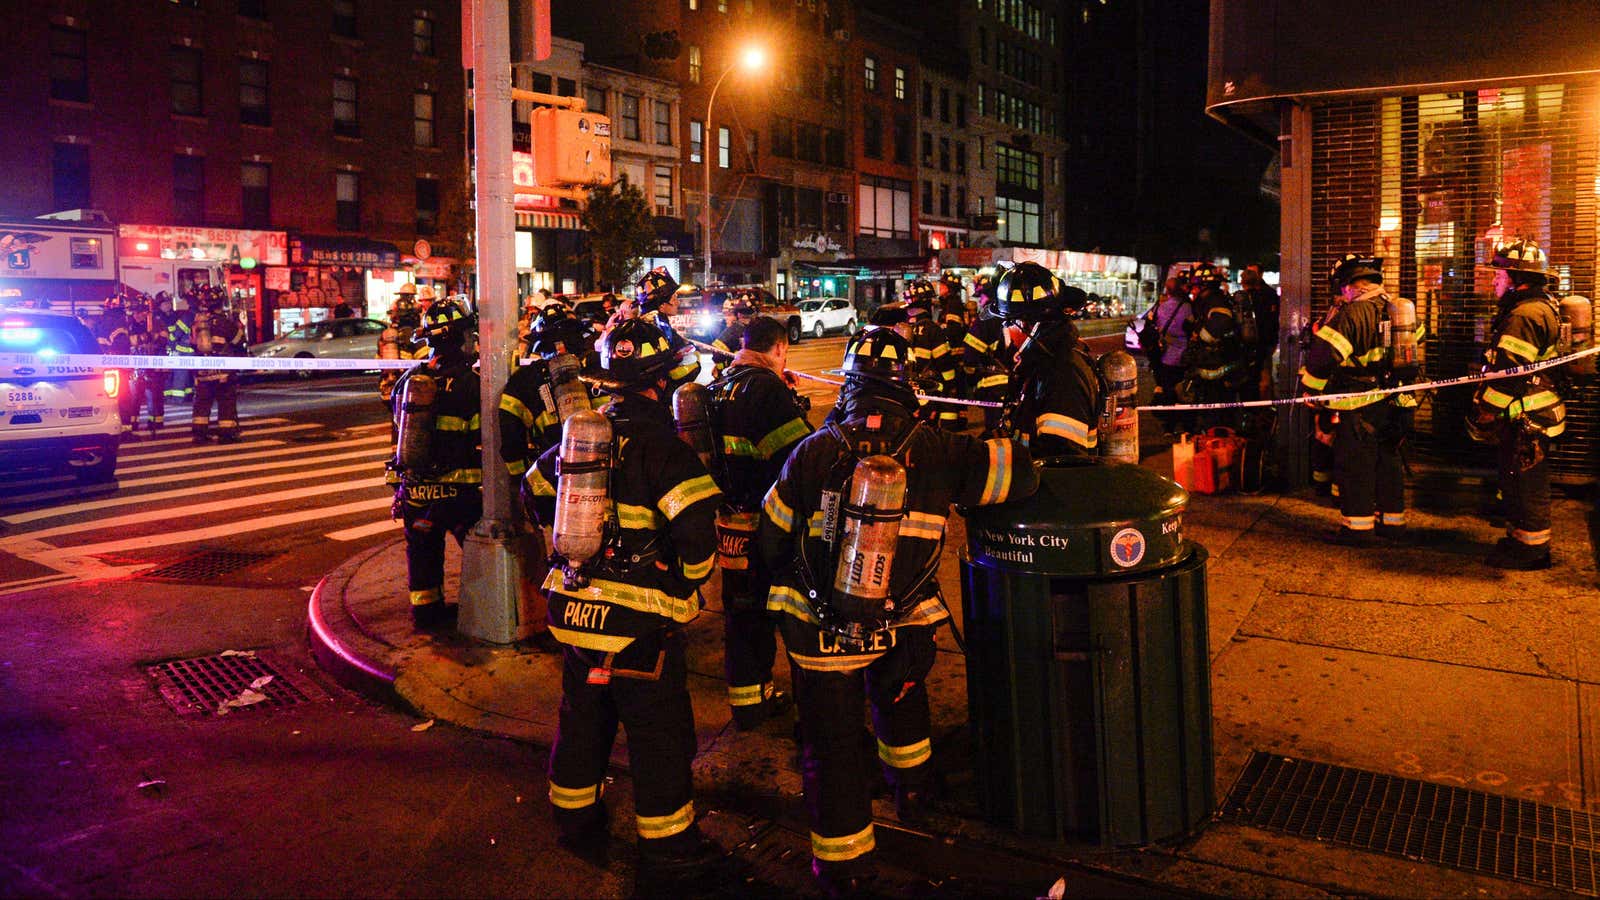 New York City firefighters stand near the site of an explosion in the Chelsea neighborhood of Manhattan, New York.